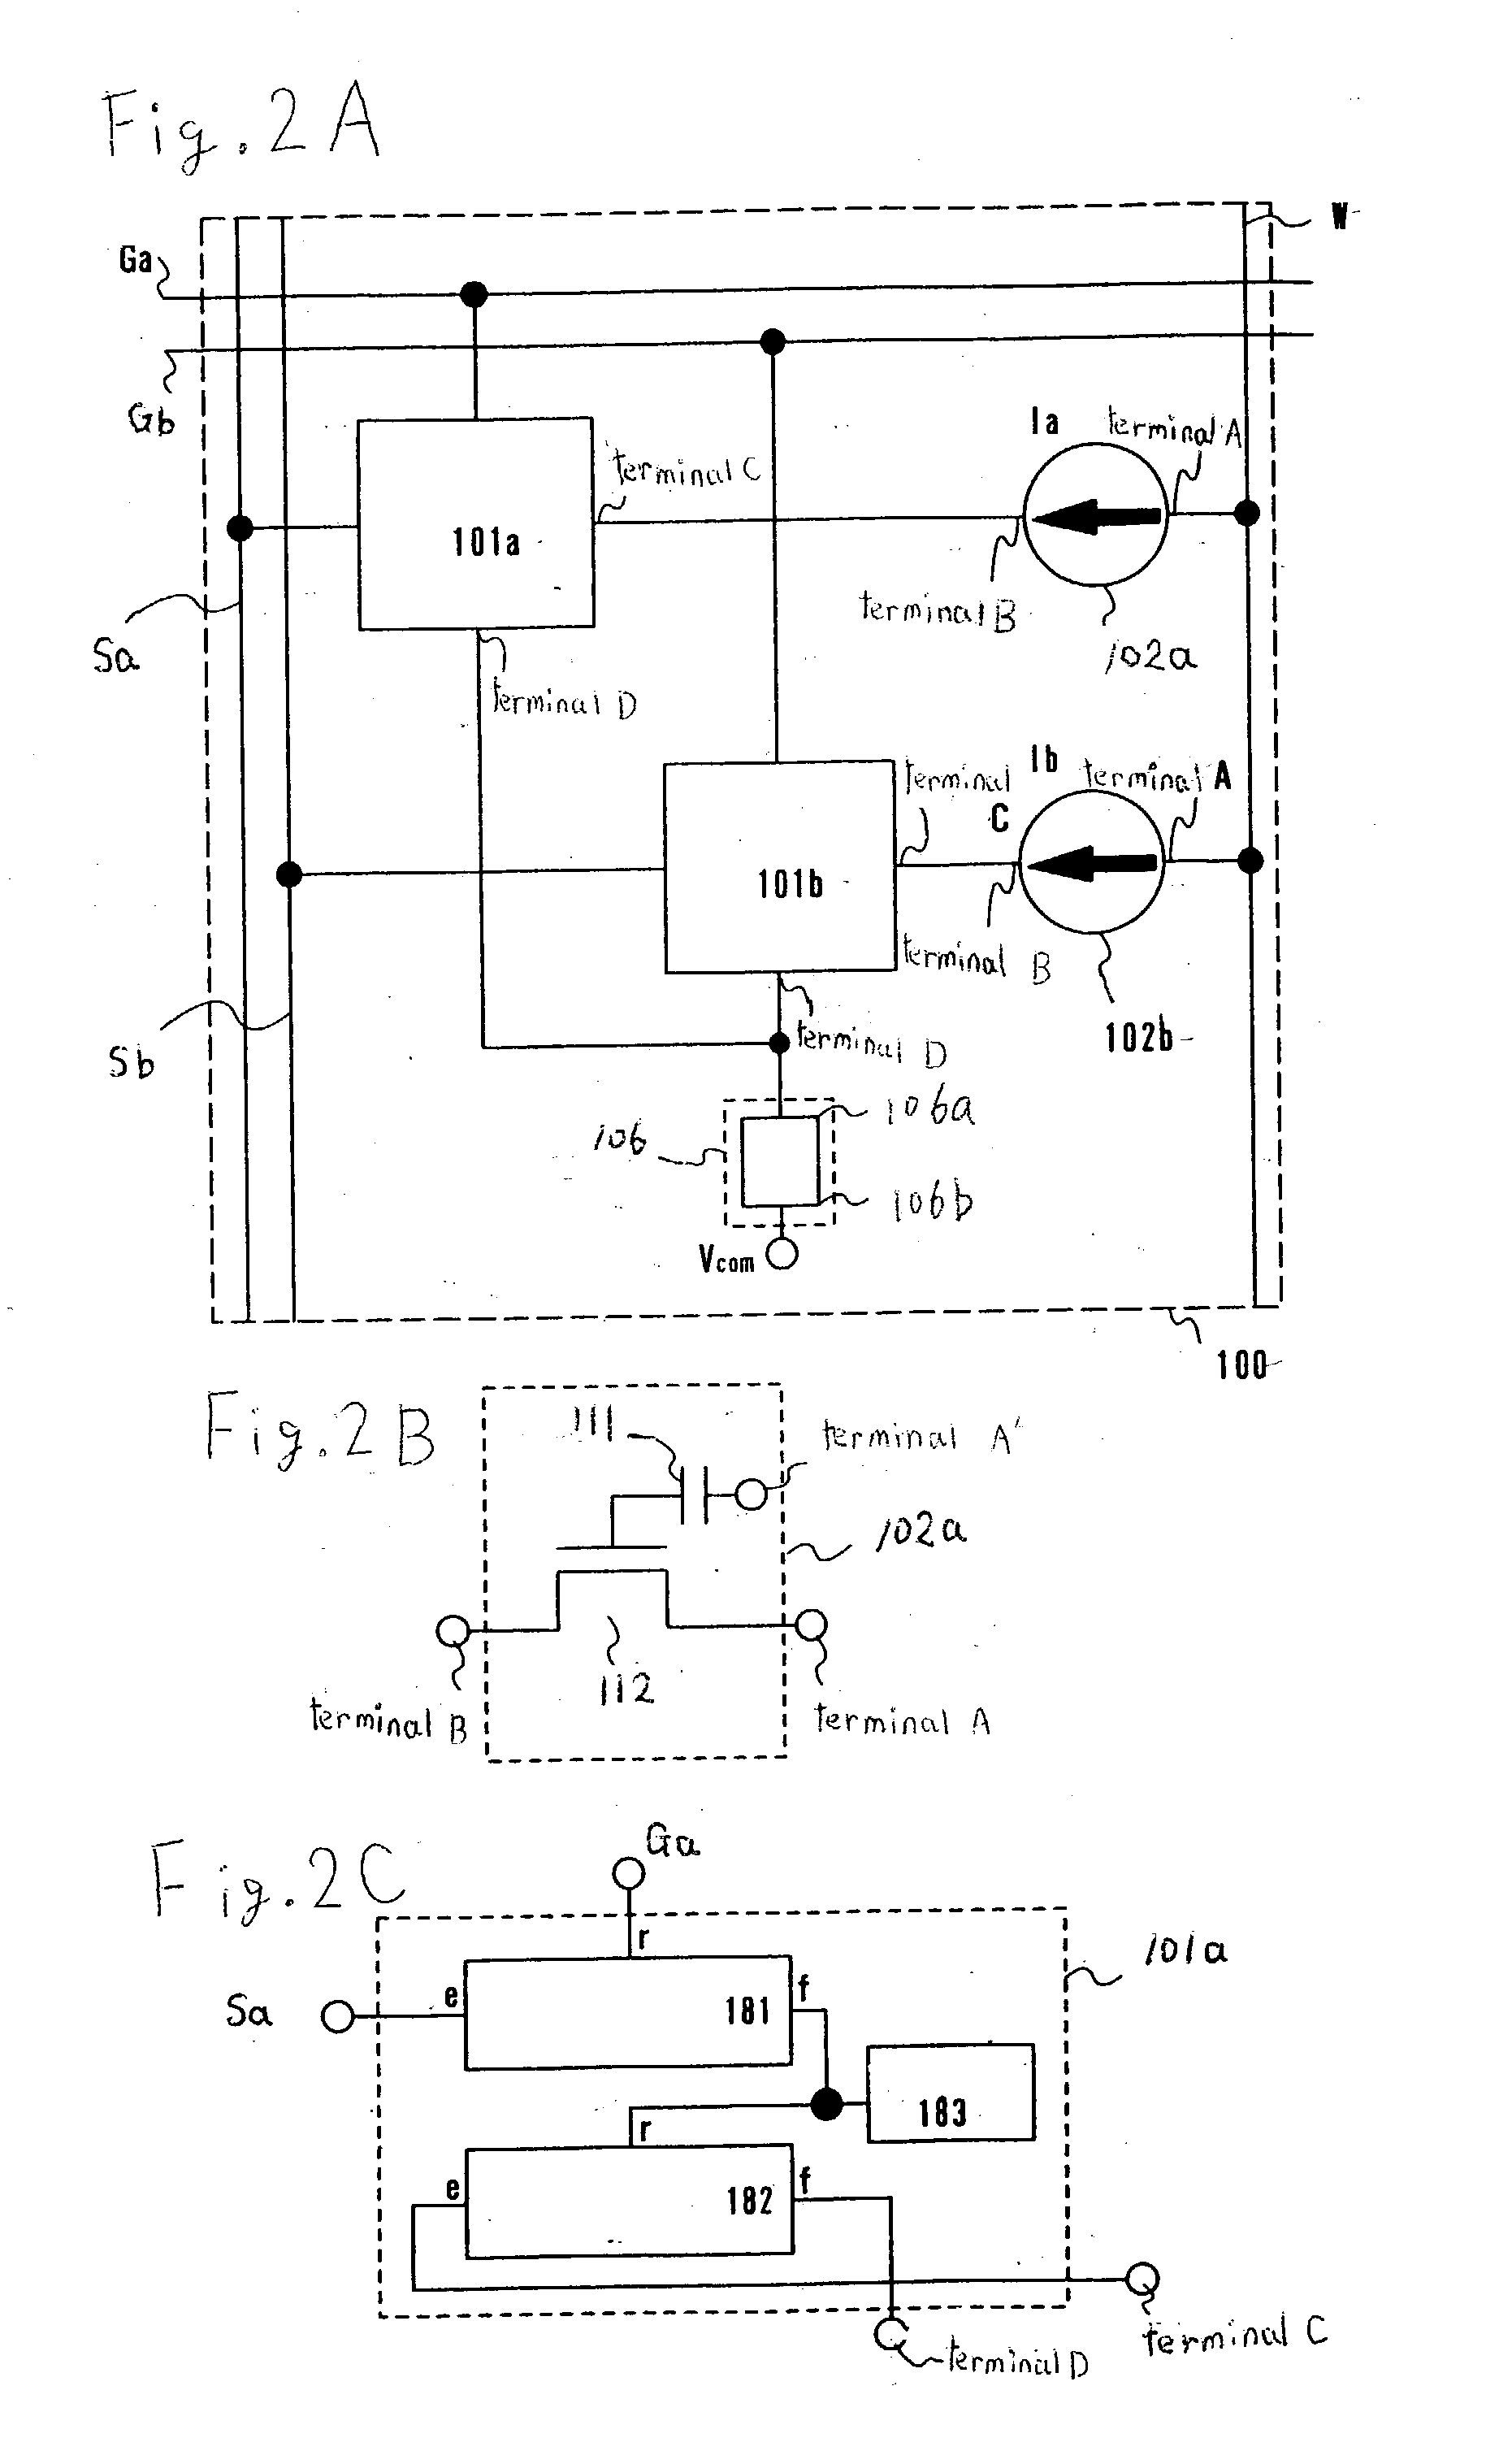 Display apparatus and driving method thereof